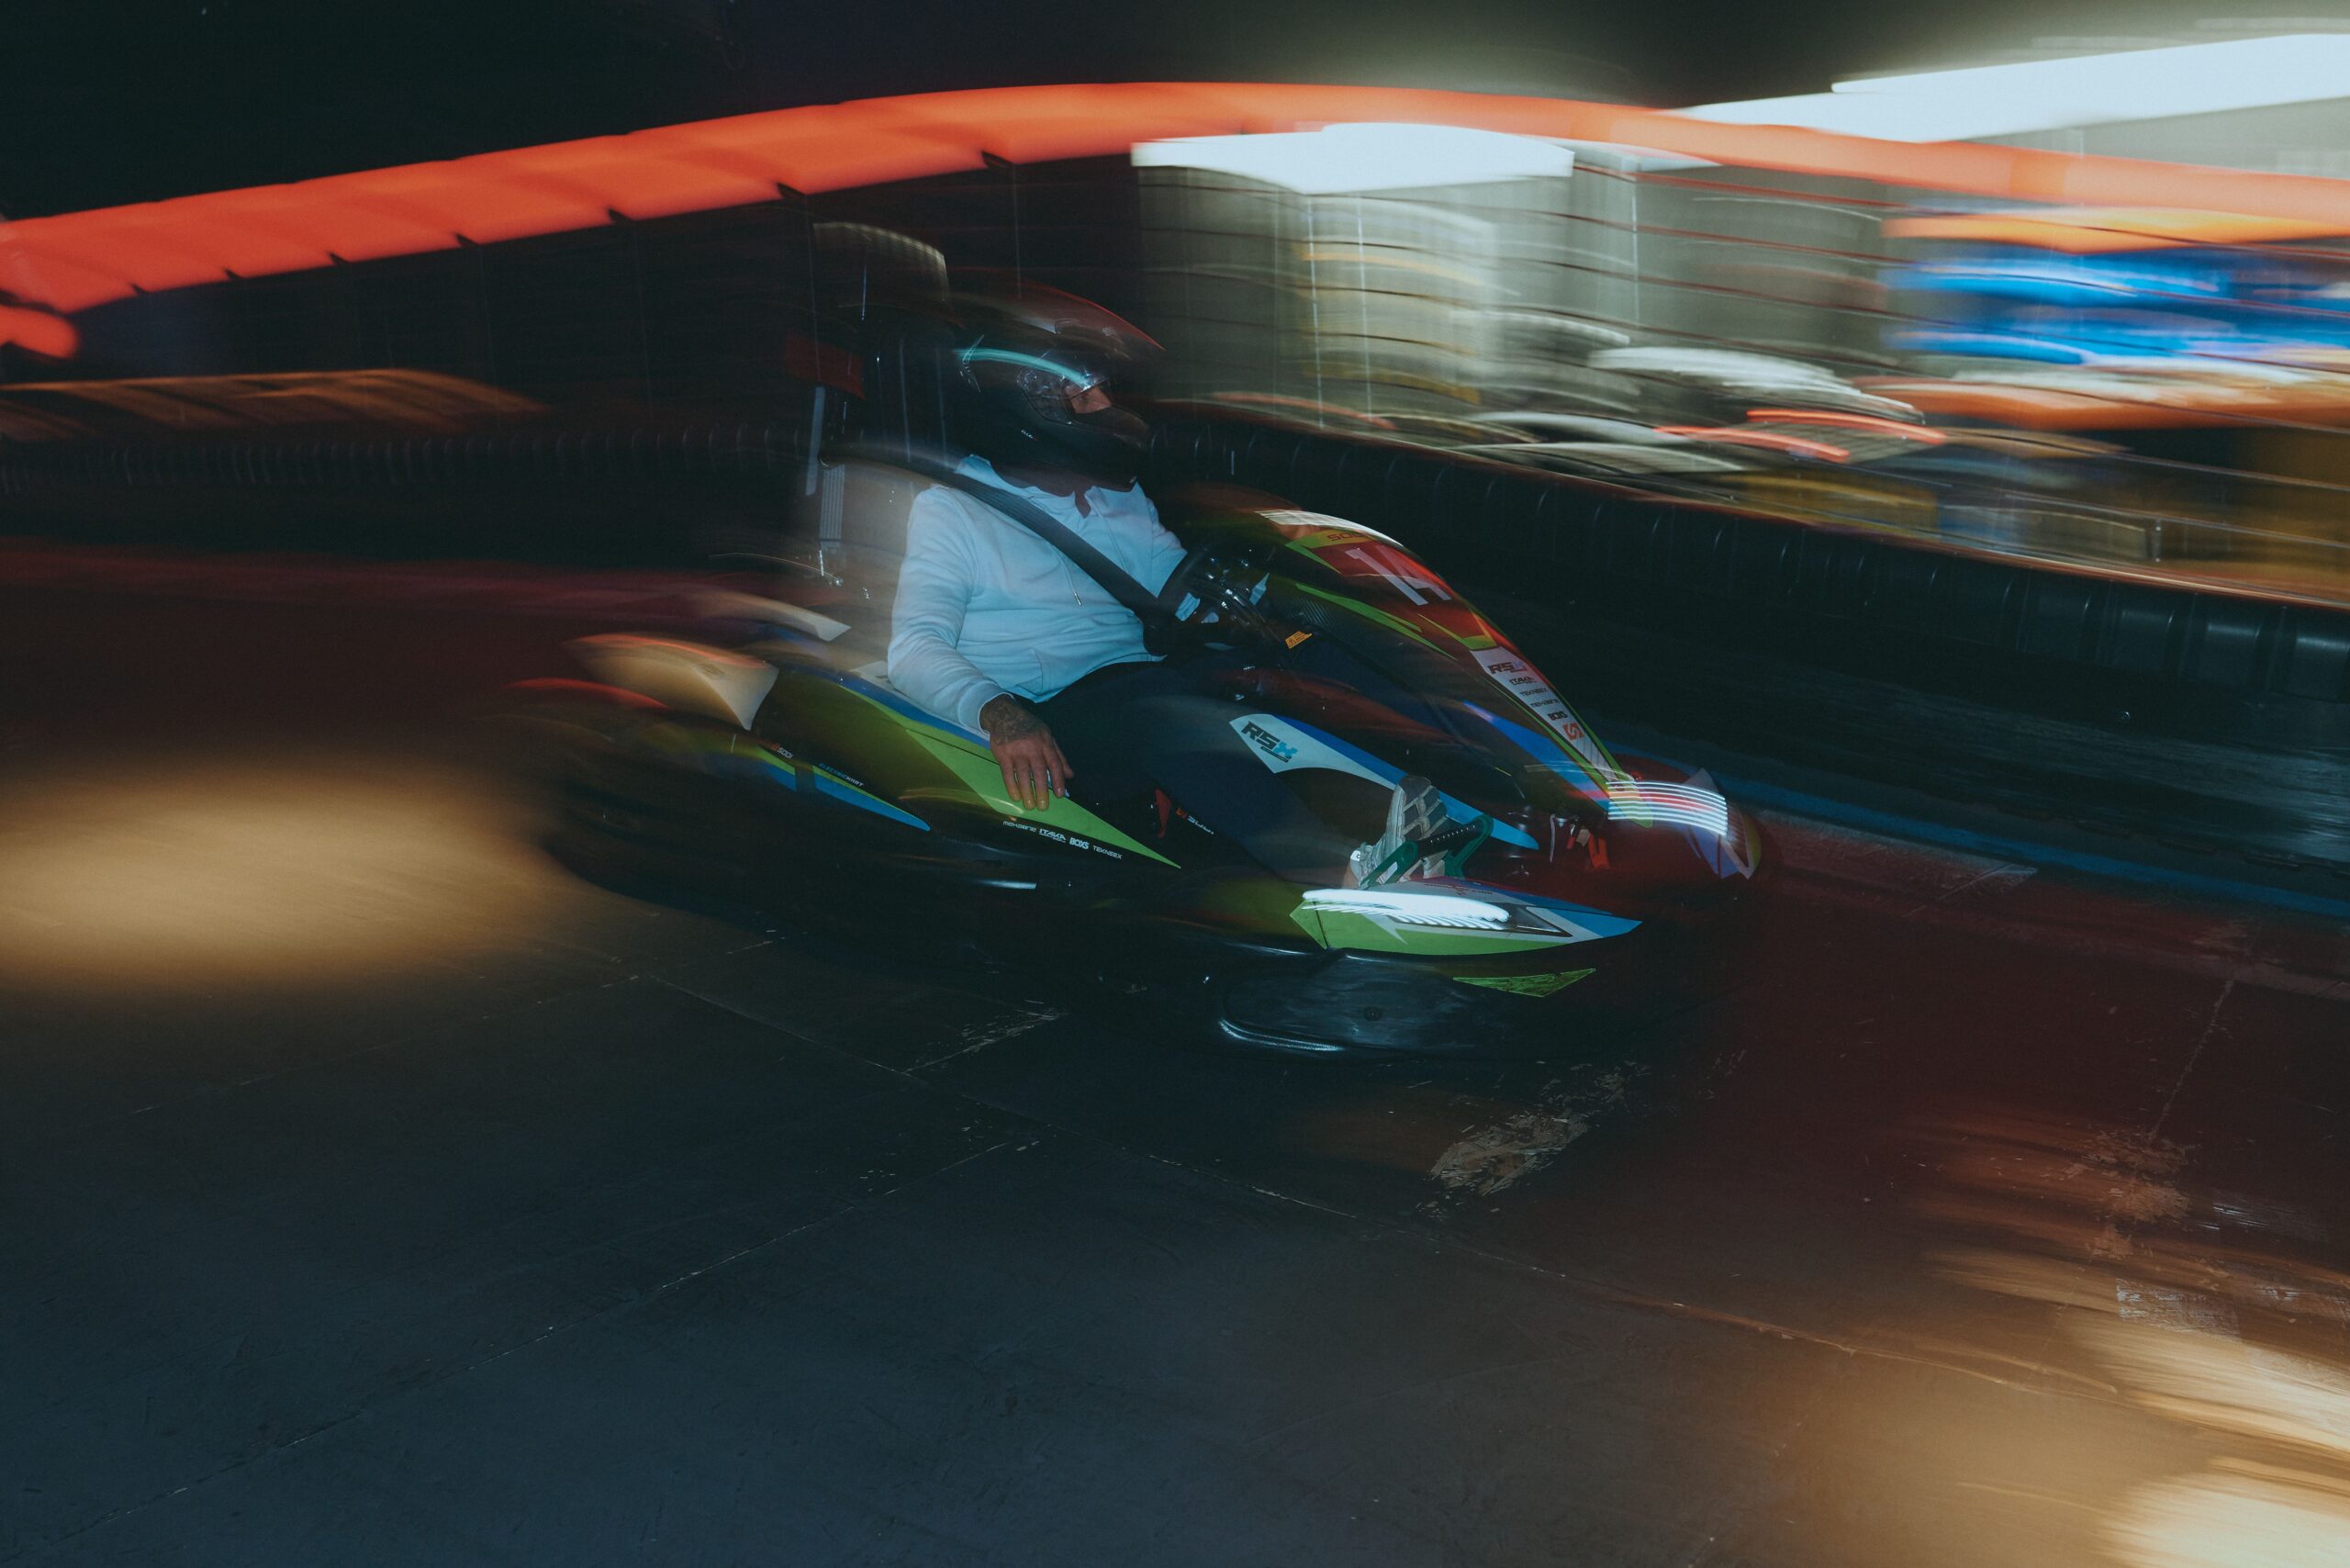 A driver on the unique electric kart track at Level X